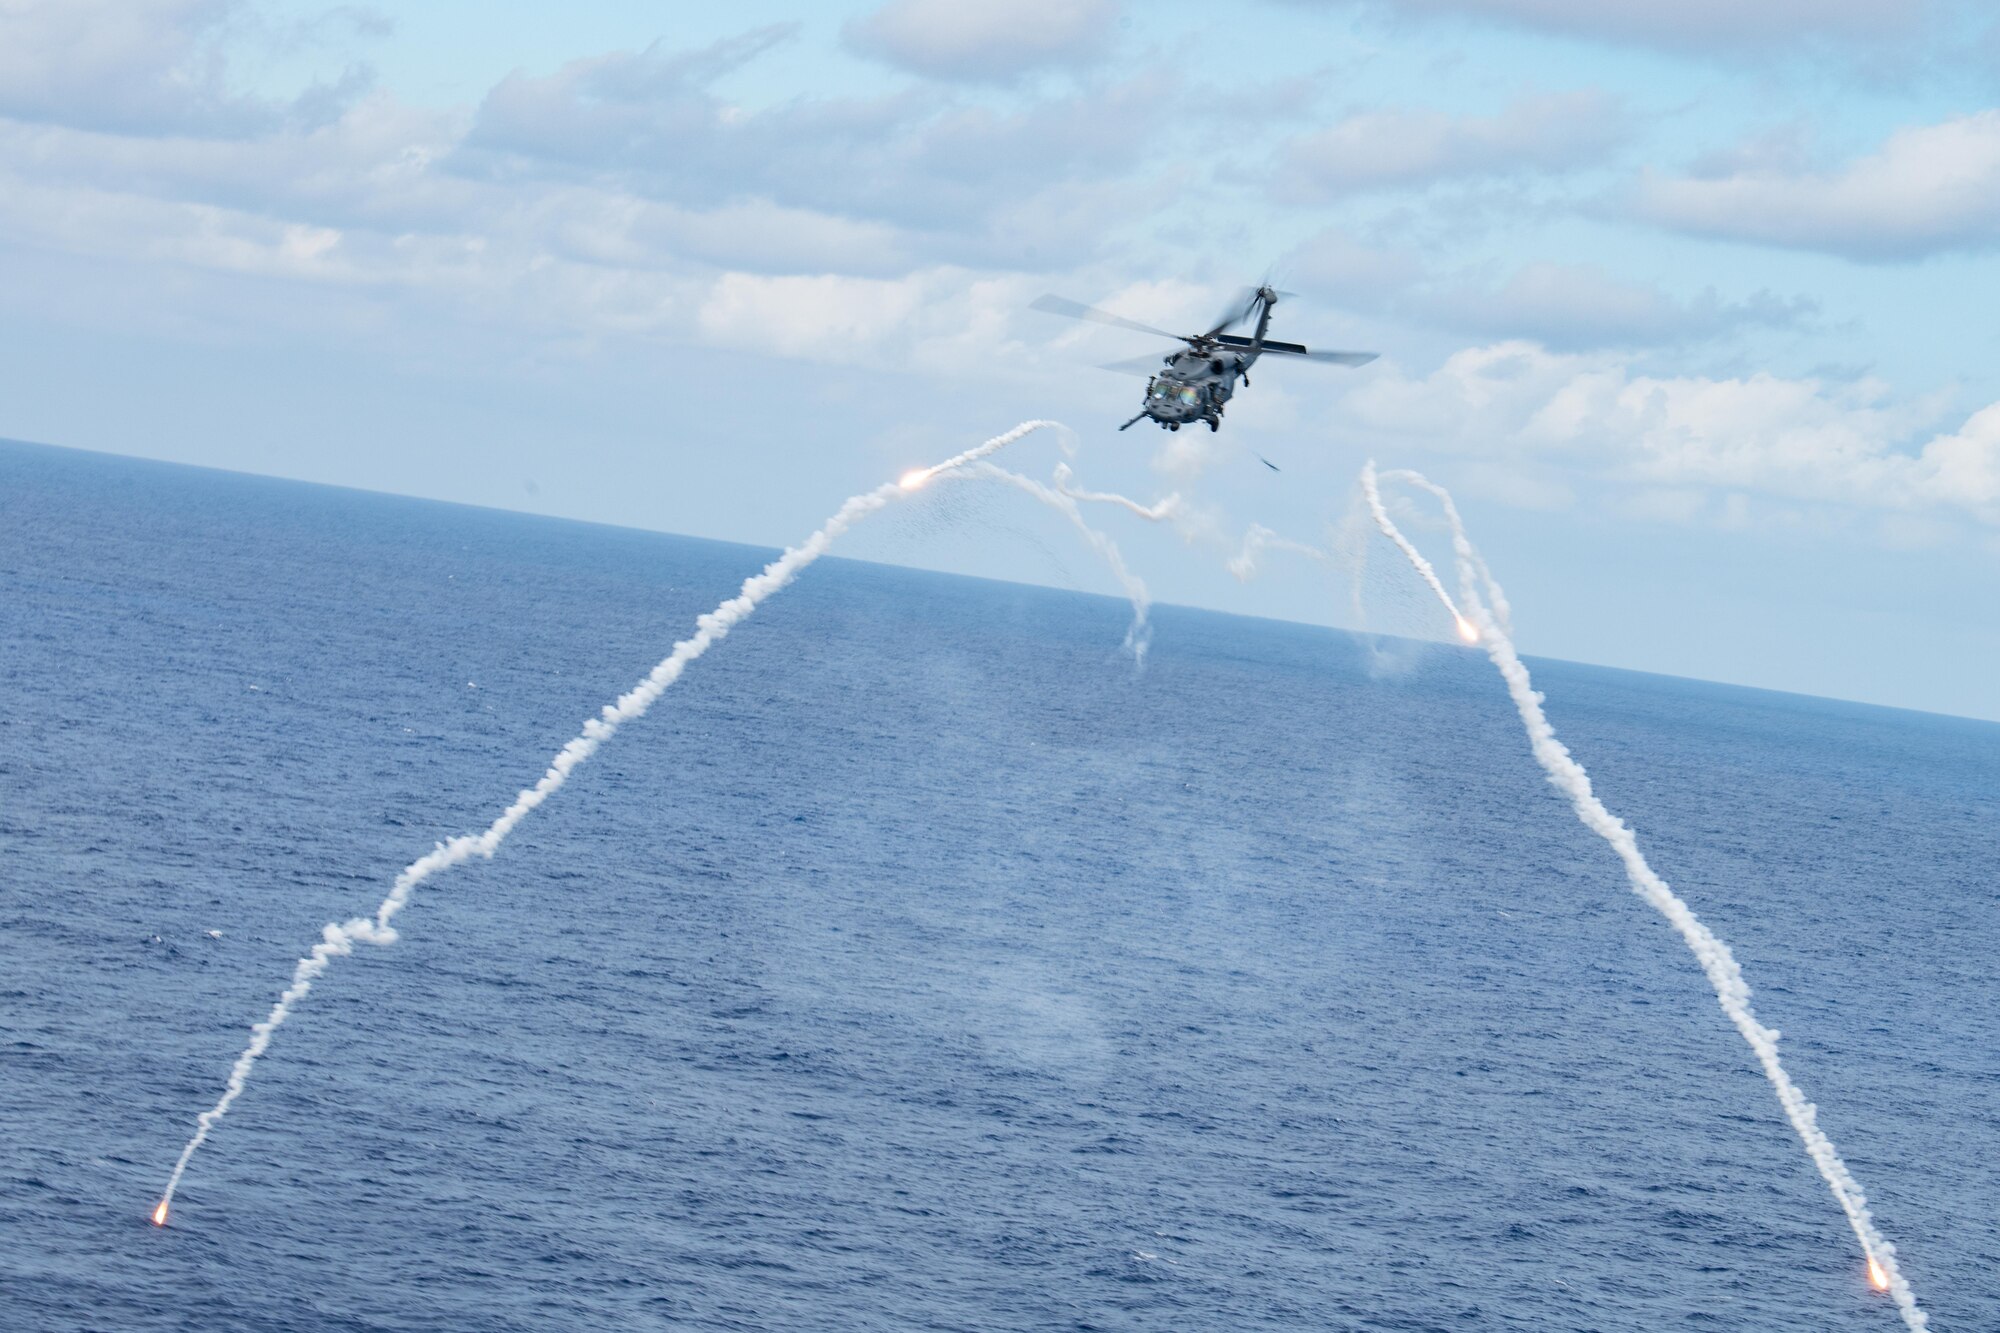 A helicopter shoots flares over the ocean